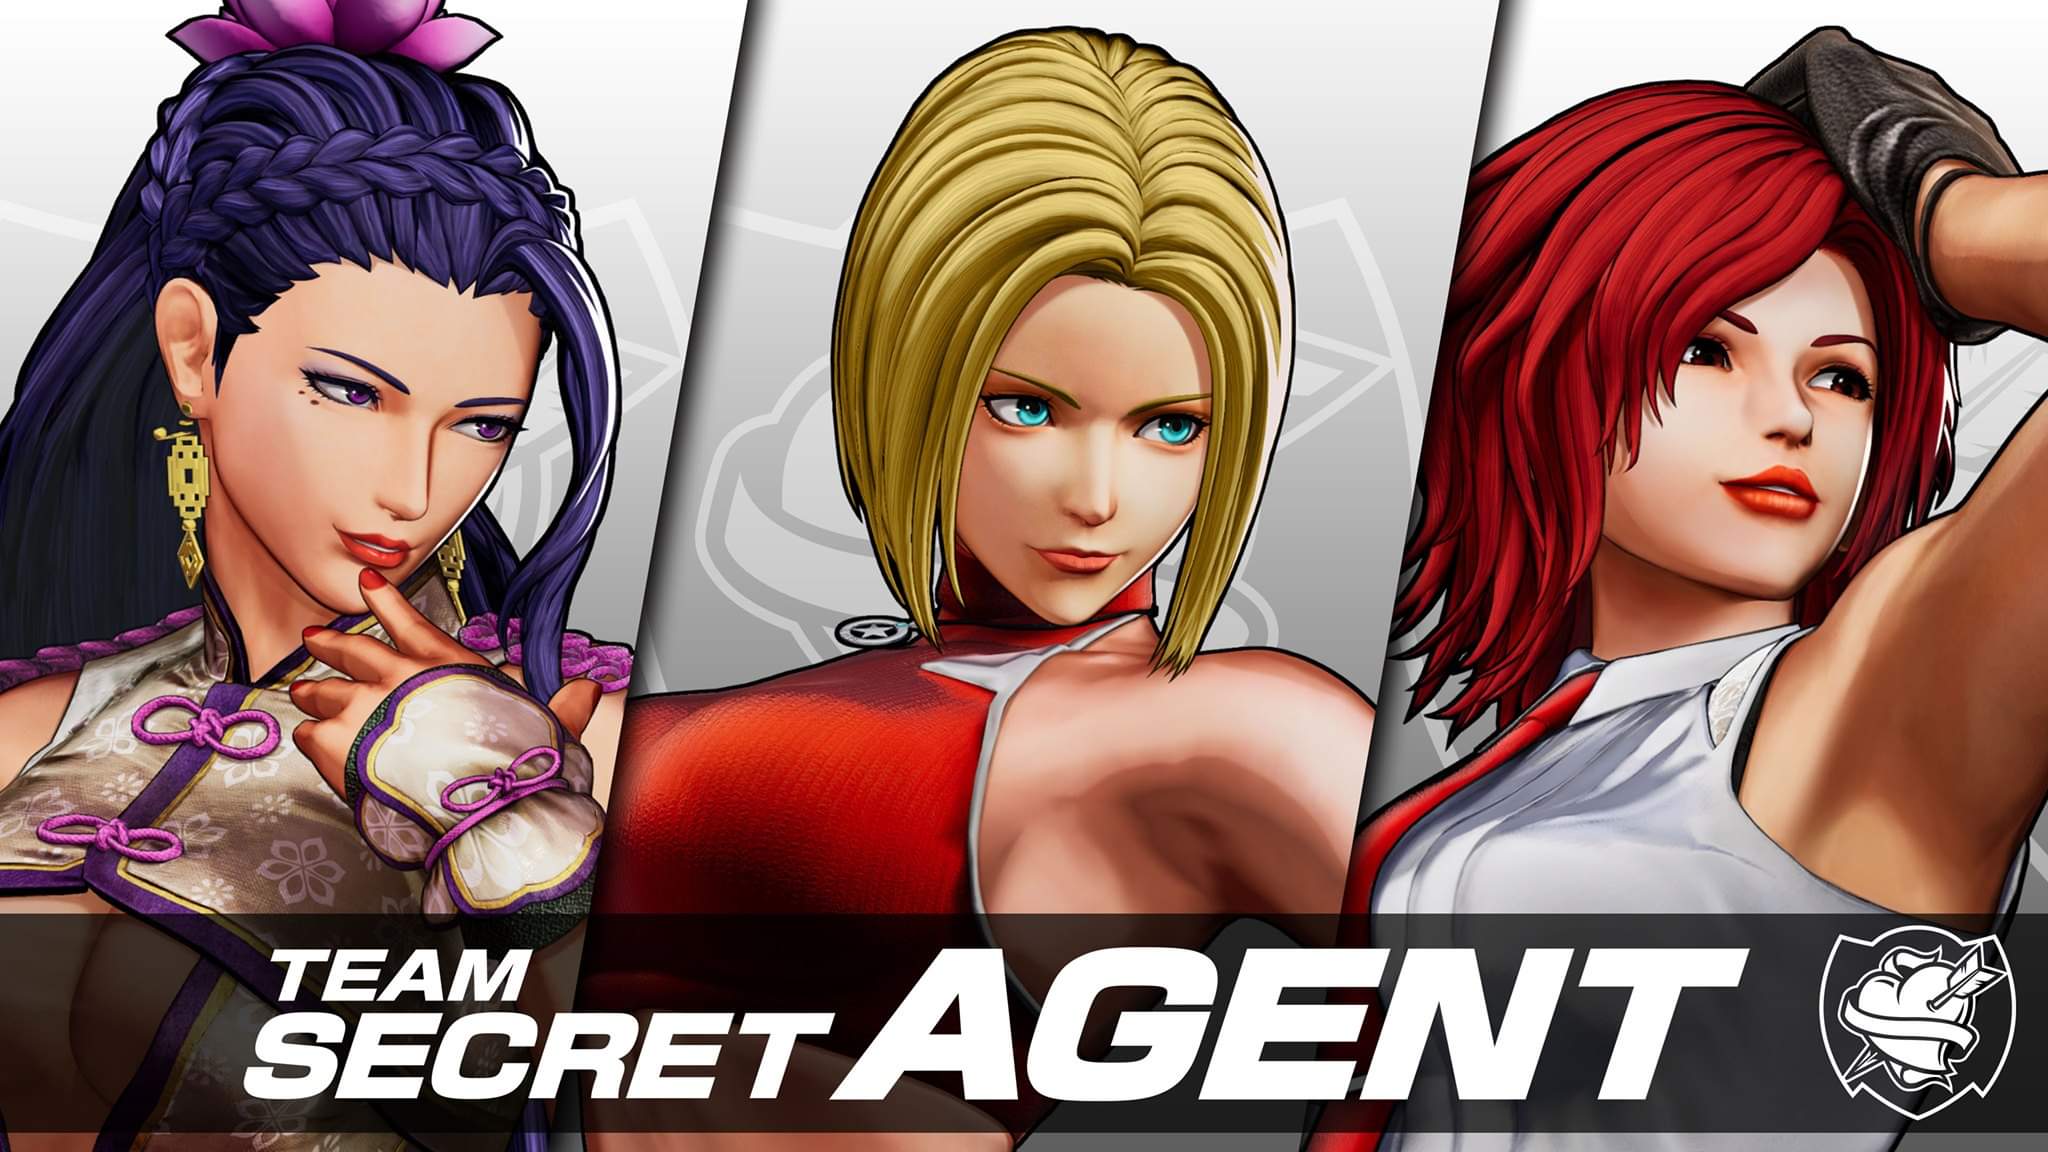 King of Fighters 15. The King of Fighters XV. KOF XV Vanessa. Luong King of Fighters XV. Team agents